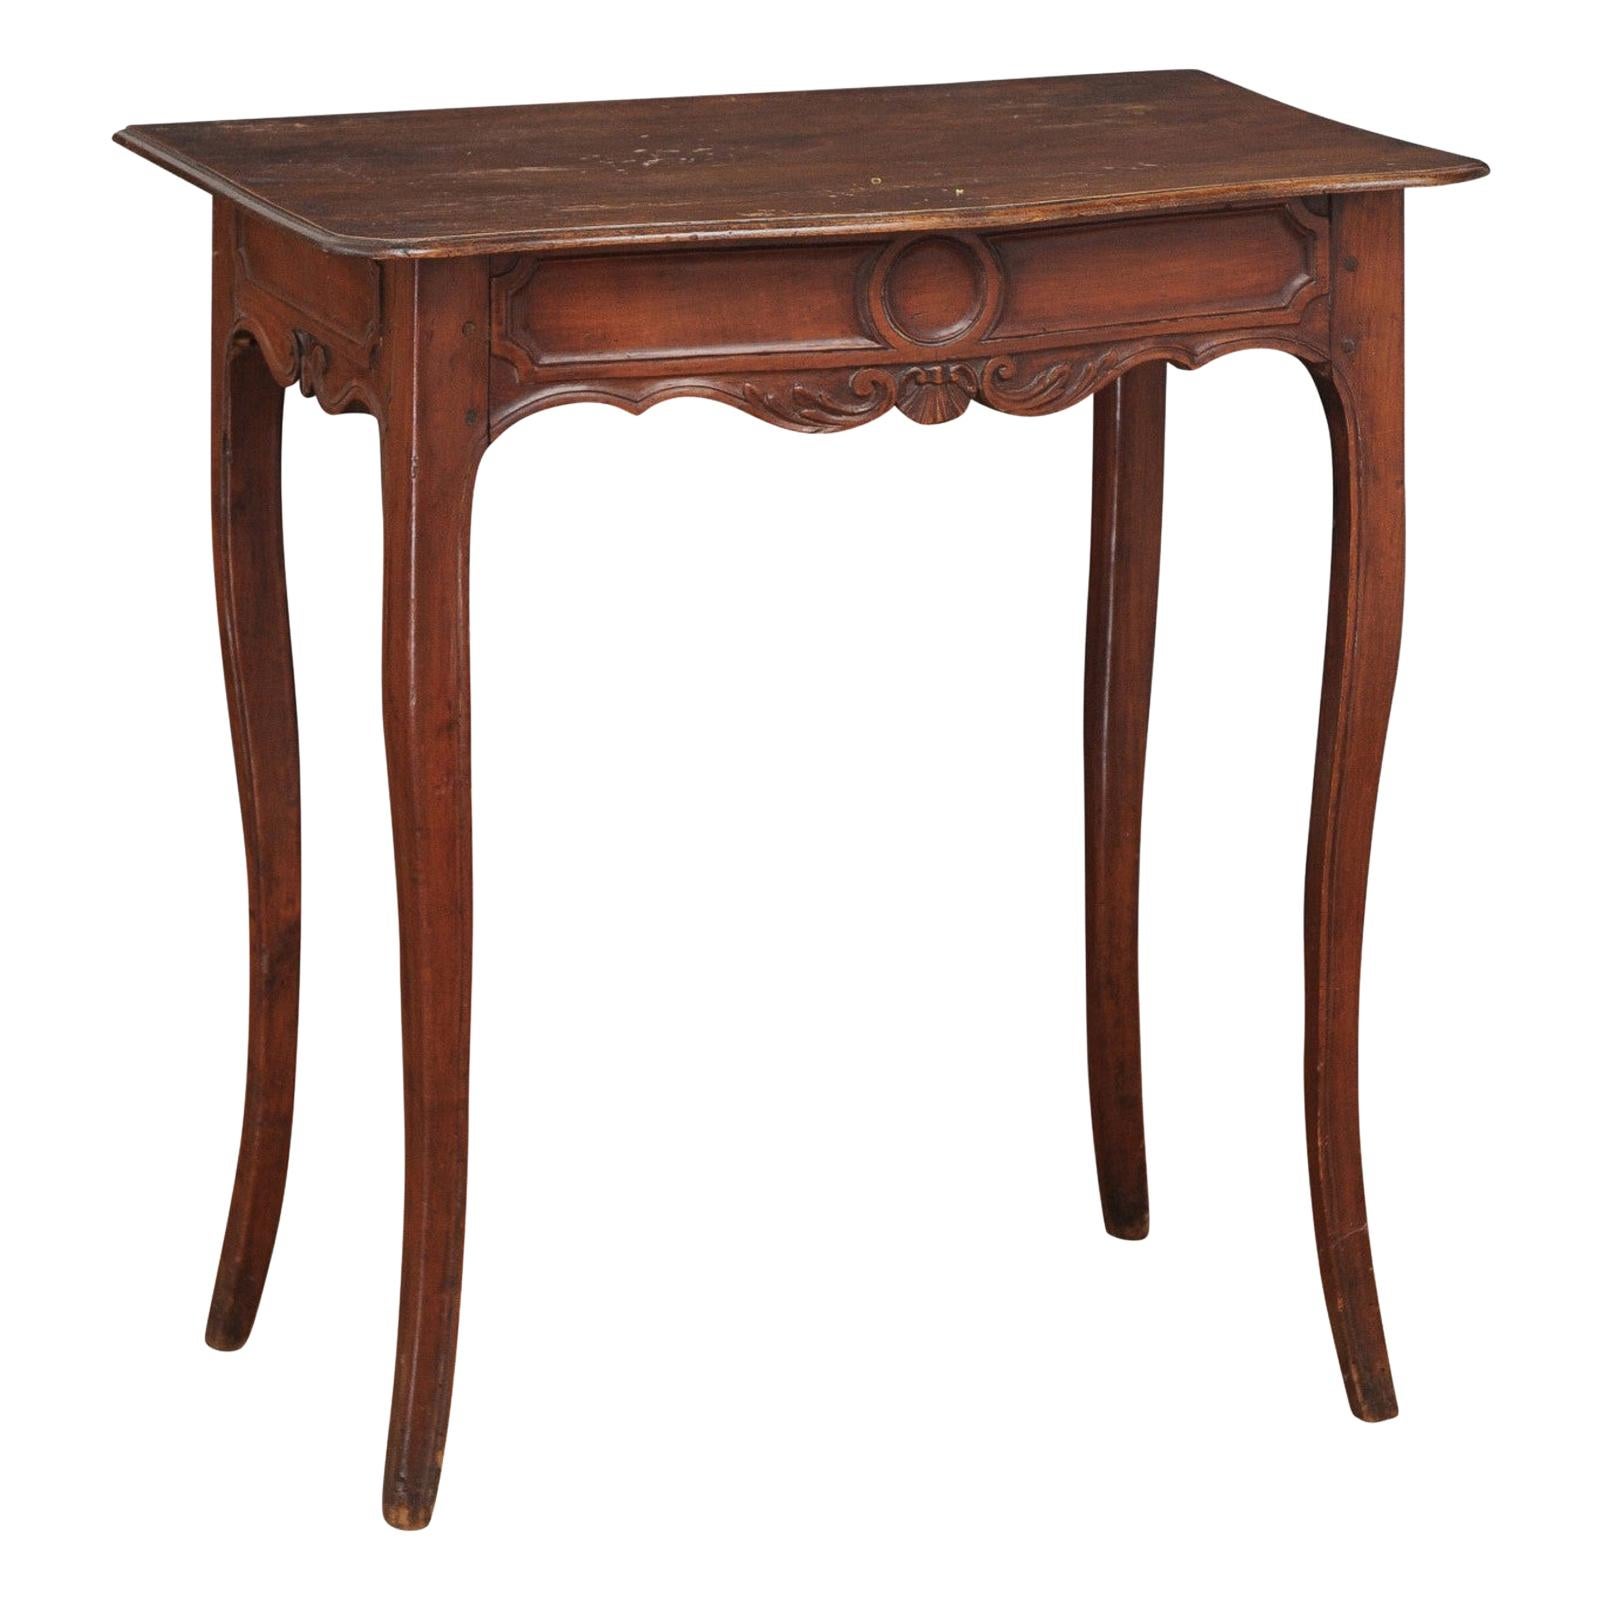 French 1790s Walnut Side Table with Side Drawer, Curving Legs and Carved Apron For Sale